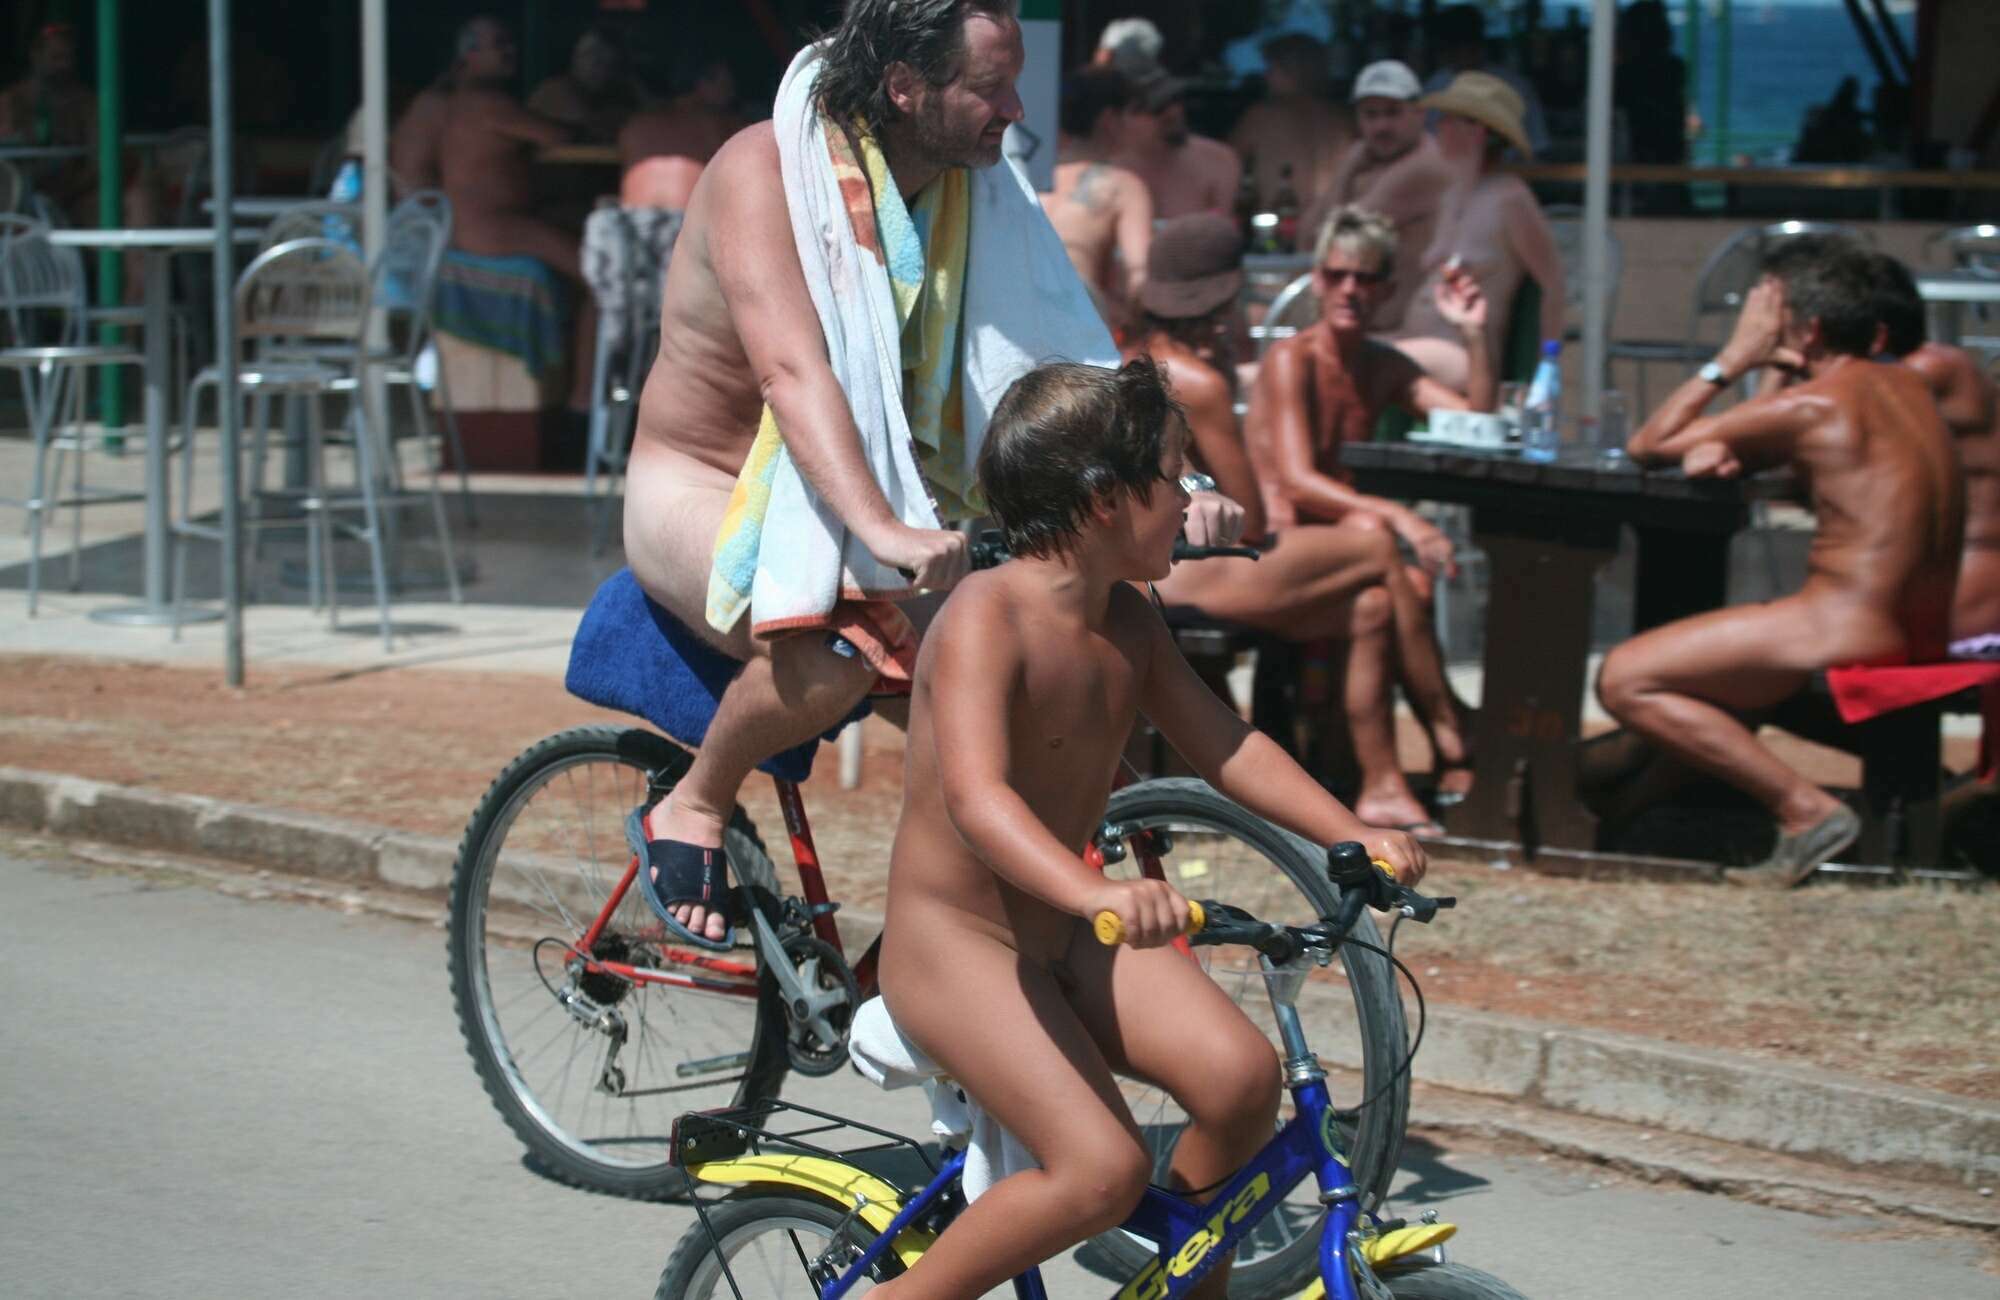 Sports and family nudism